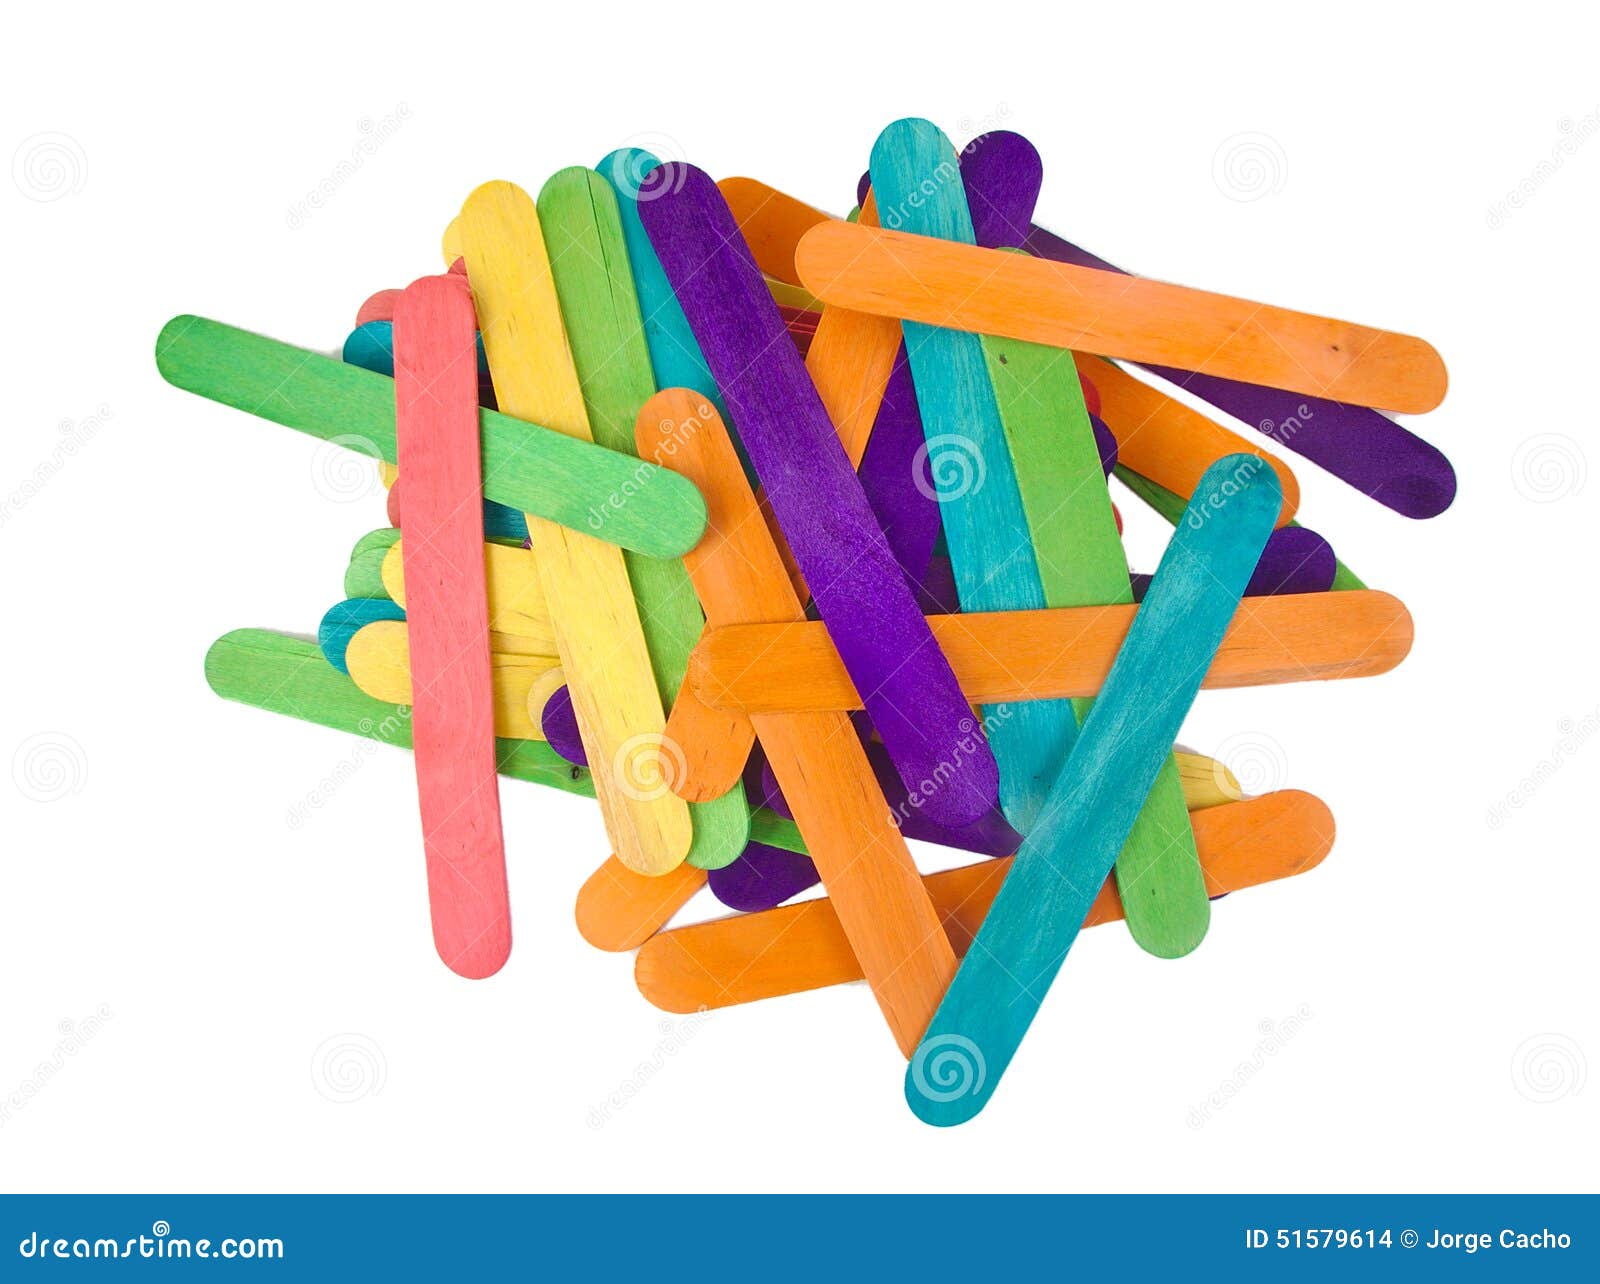 Colorful Popsicle Sticks